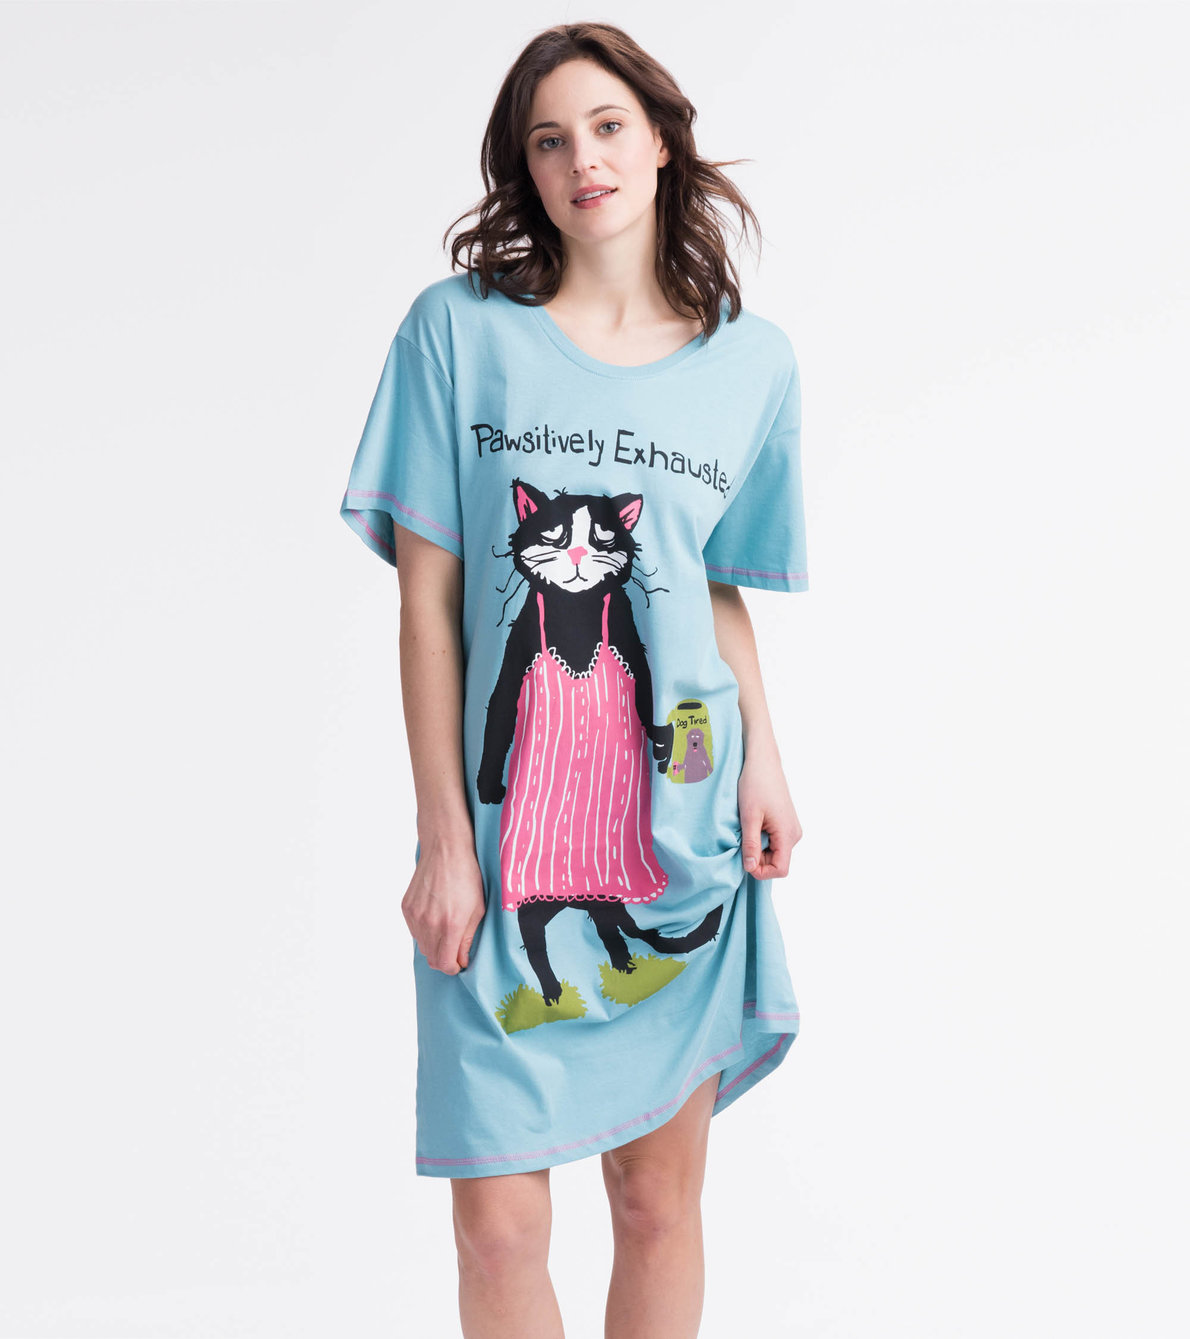 View larger image of Pawsitively Exhausted Women's Sleepshirt